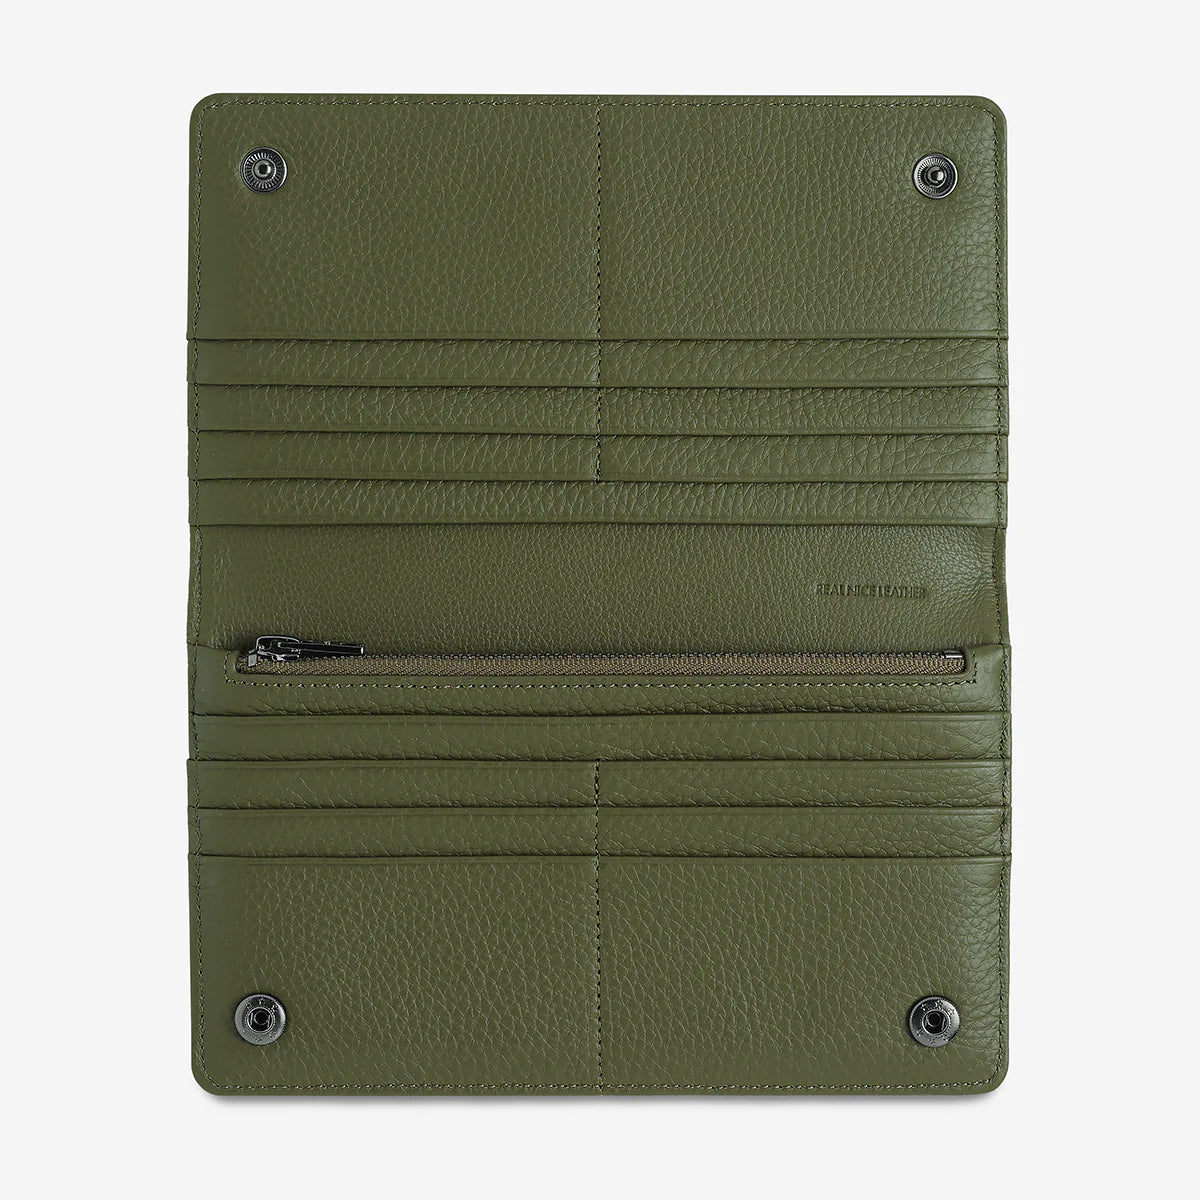 Status Anxiety Living Proof Leather Wallet - Khaki 